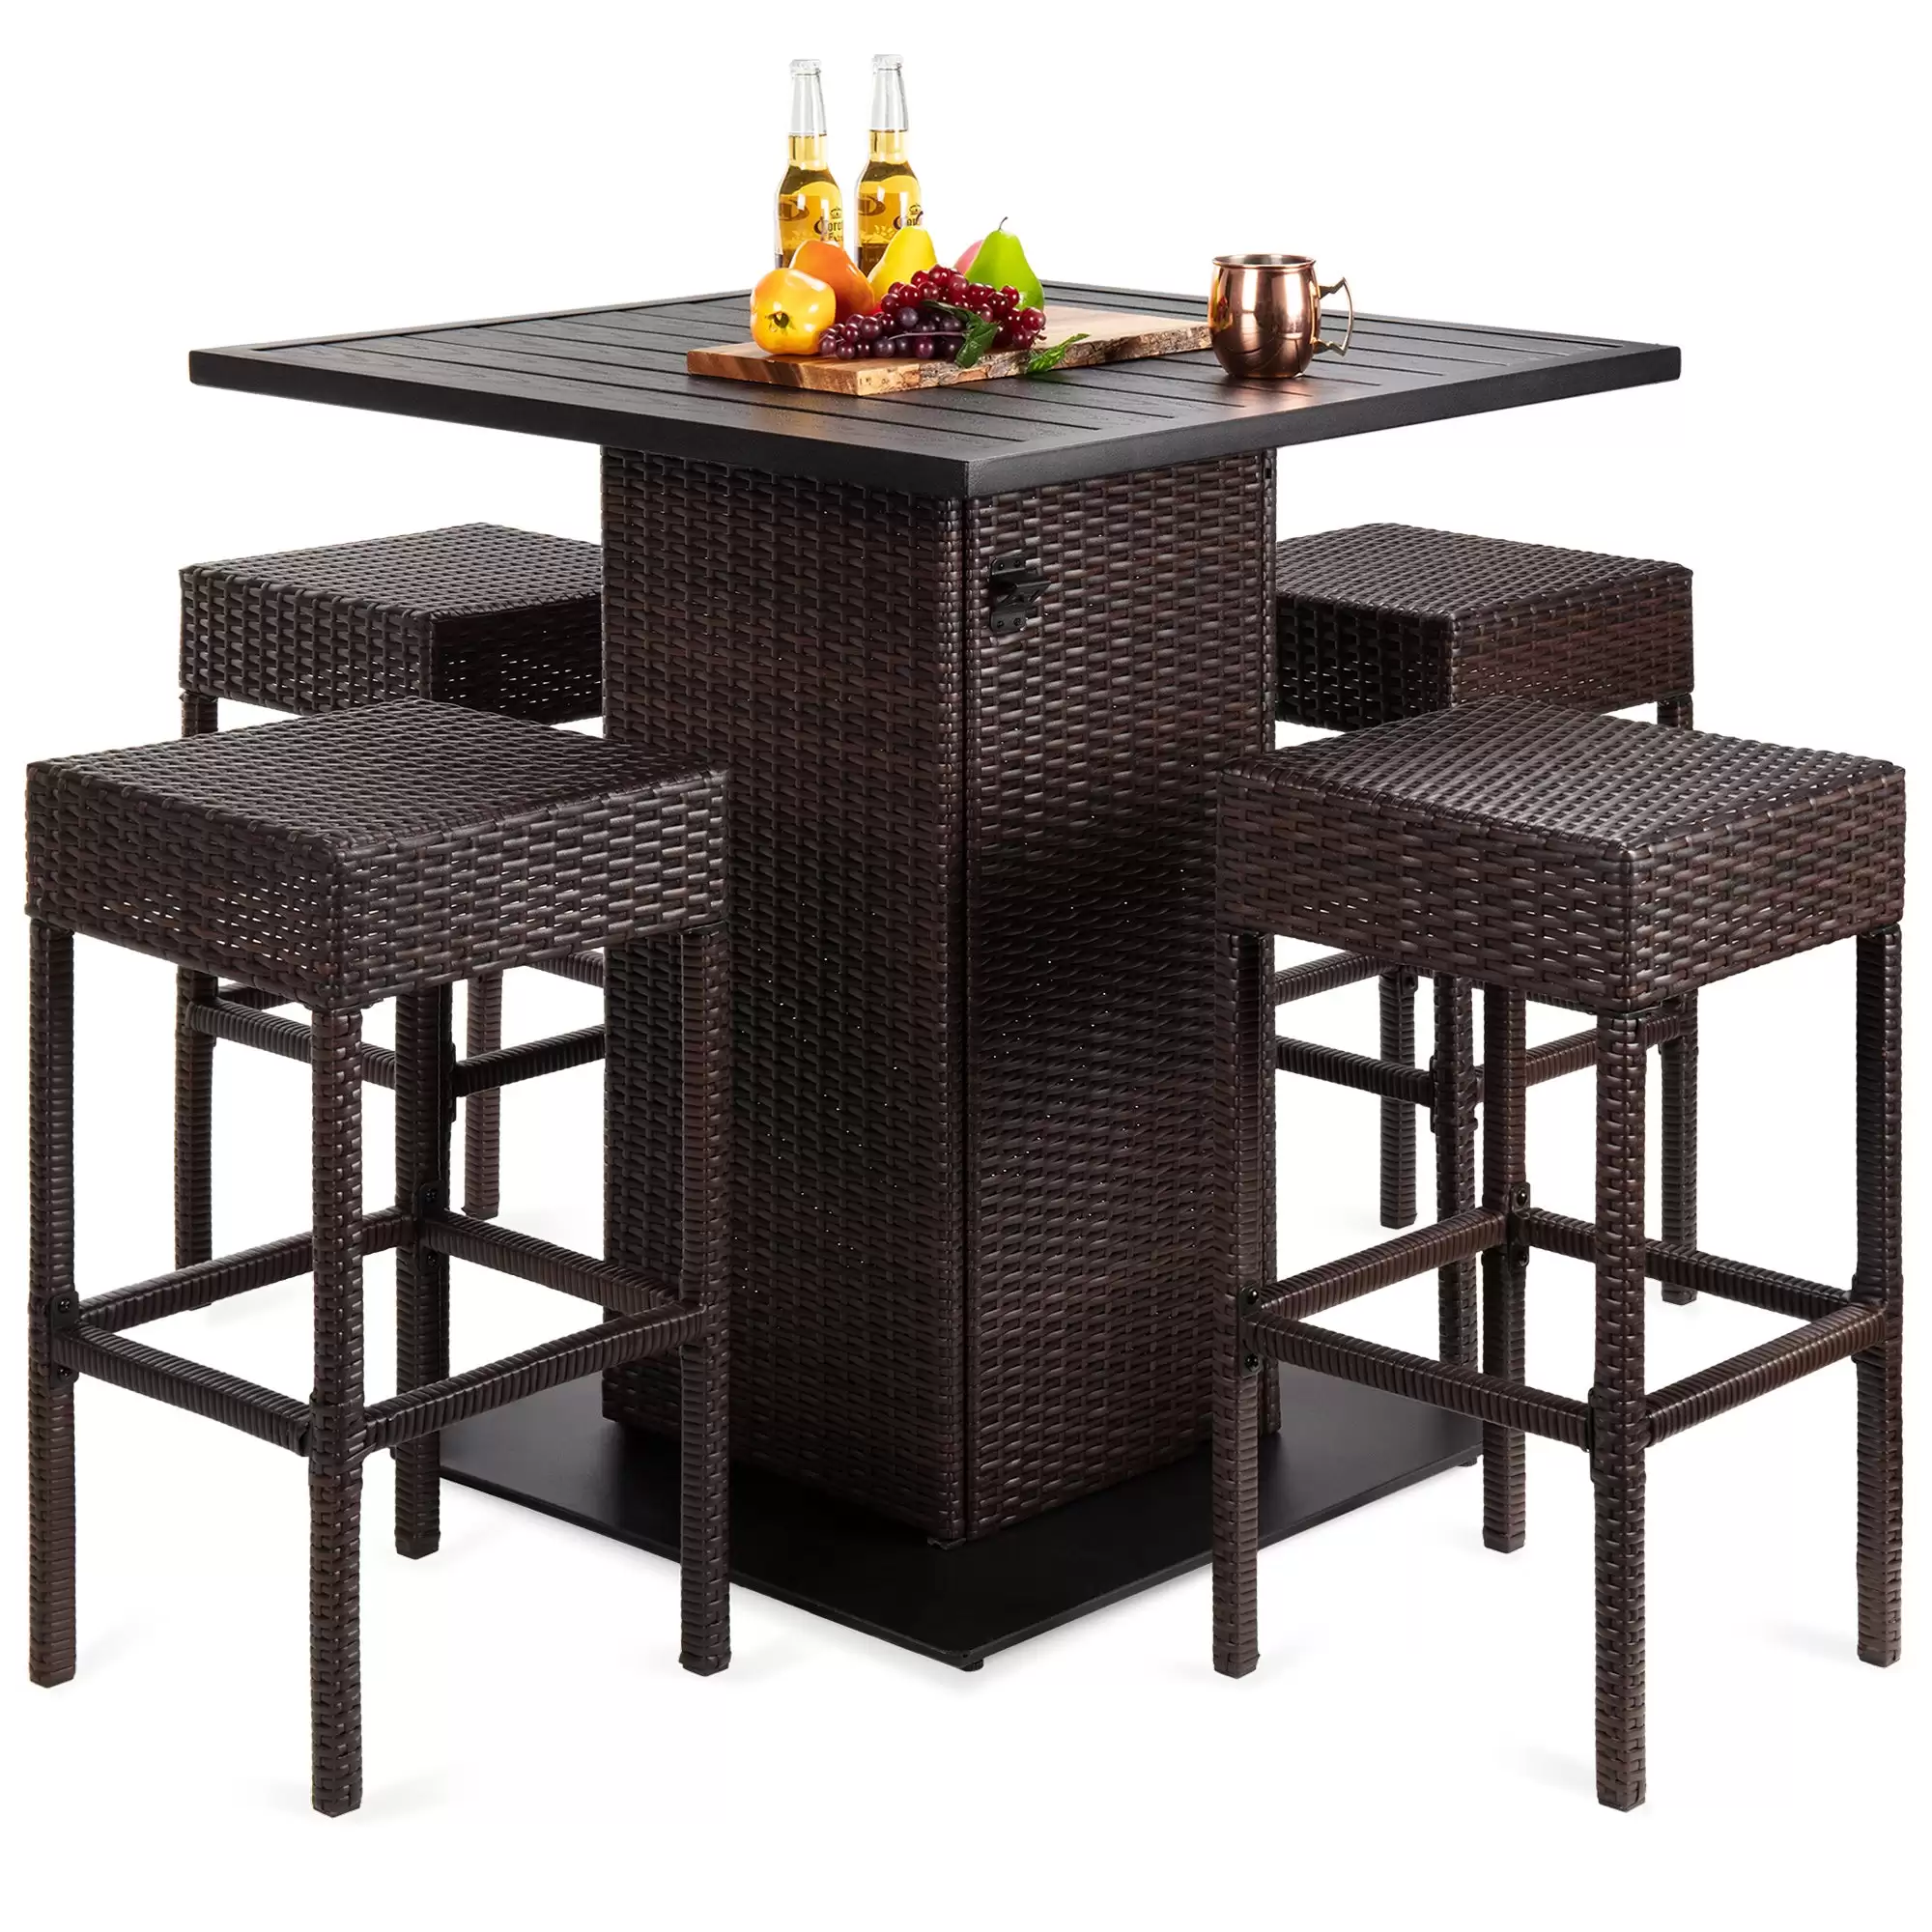 Pay $351.99 5-Piece Wicker Bar Set W/ 4 Stools, Built-In Bottle Opener, Hidden Storage With This Bestchoiceproducts Discount Voucher